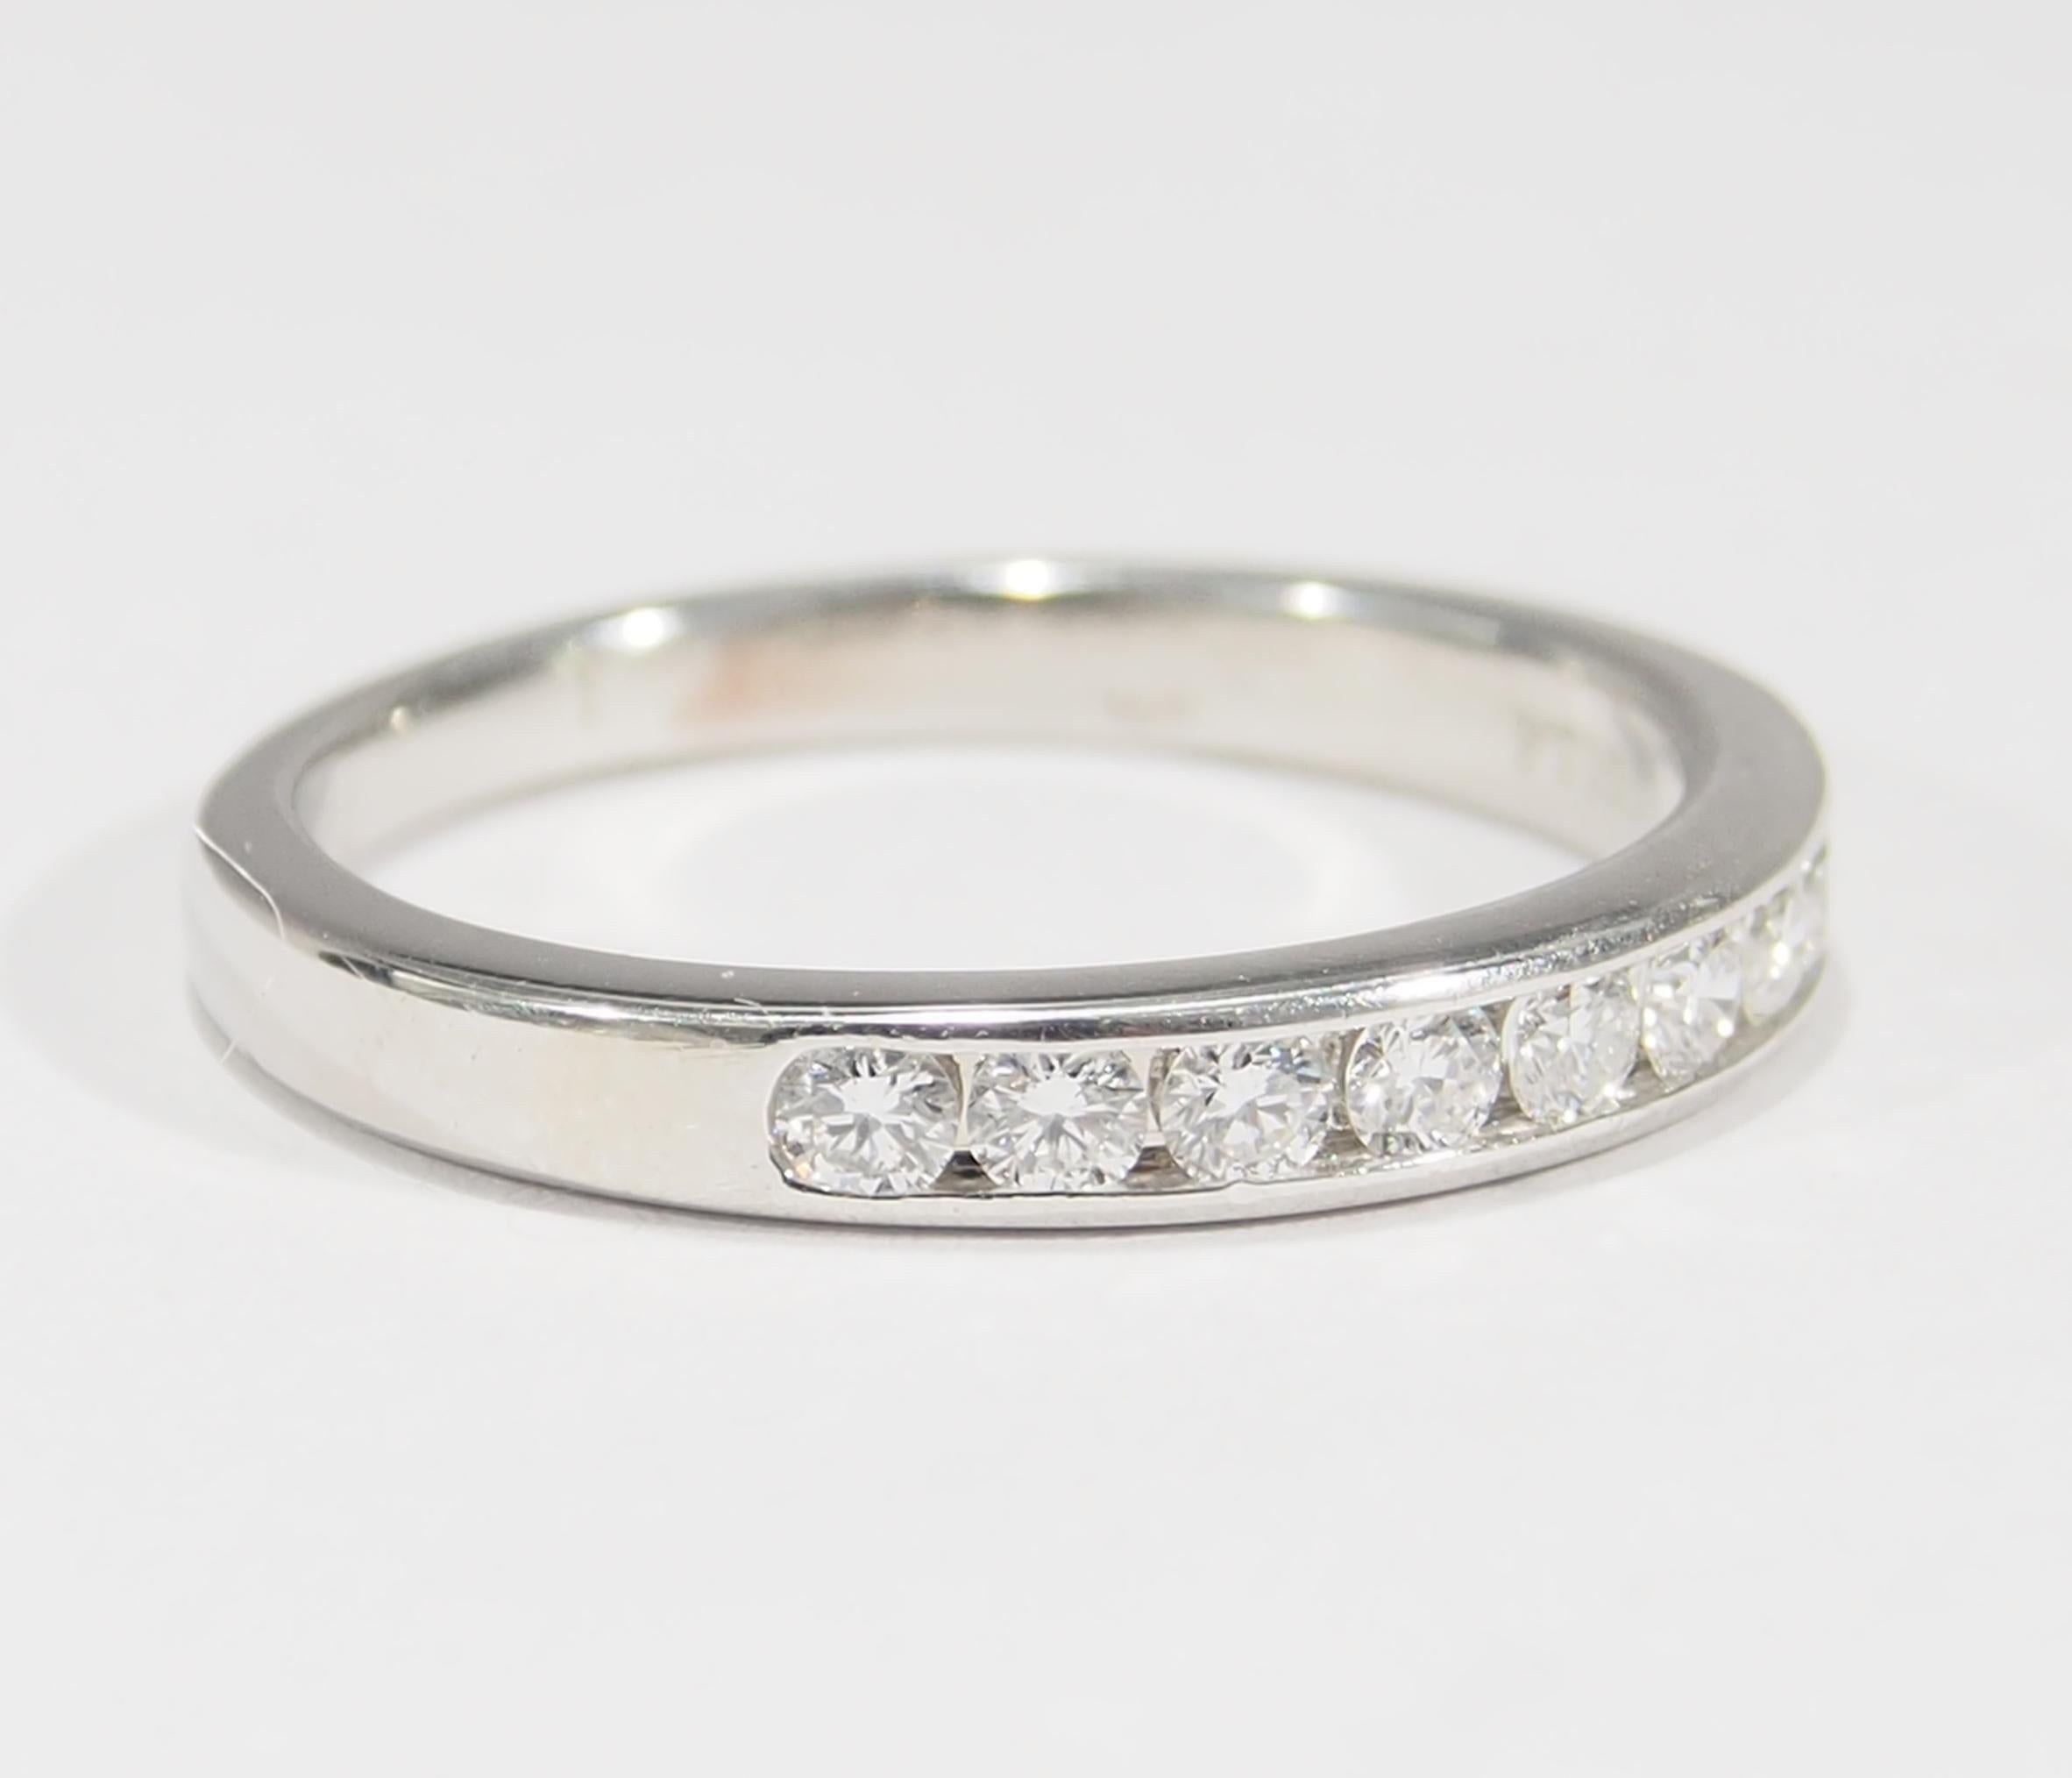 From the iconic jewelry designer, Tiffany & Company is this Platinum Diamond Band. The Ring is designed as a 